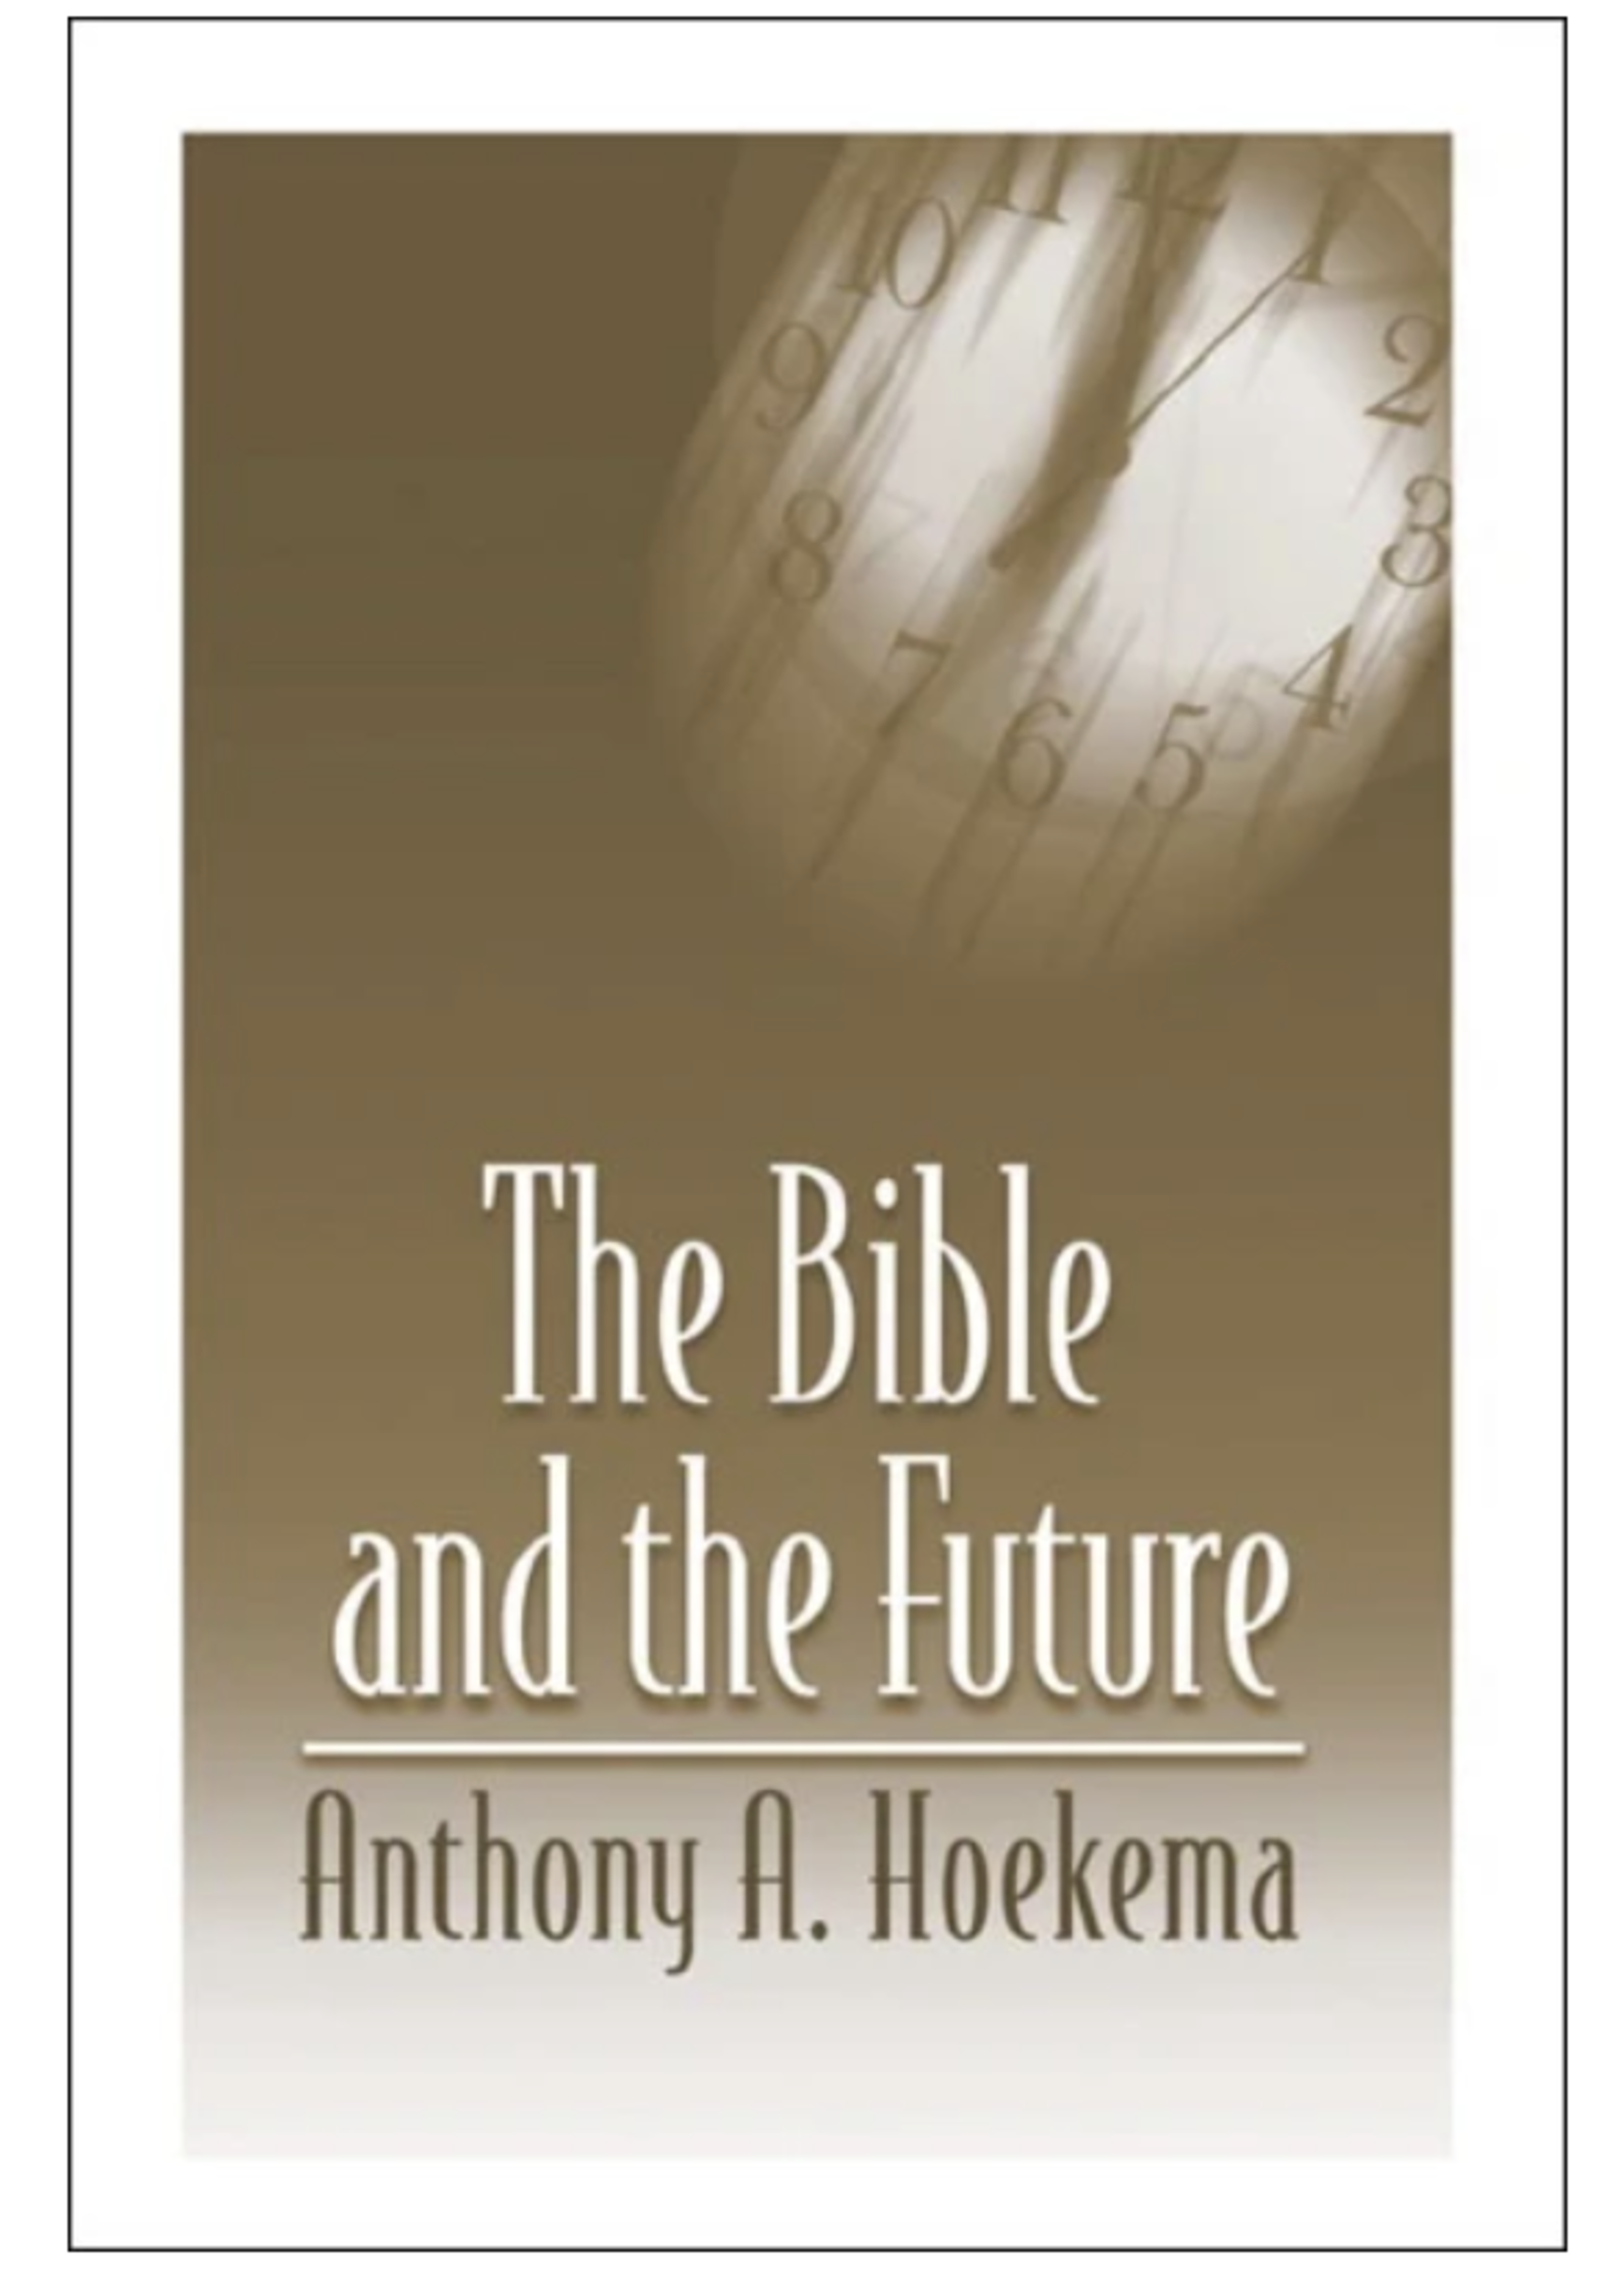 HOEKEMA, ANTHONY The Bible and the Future